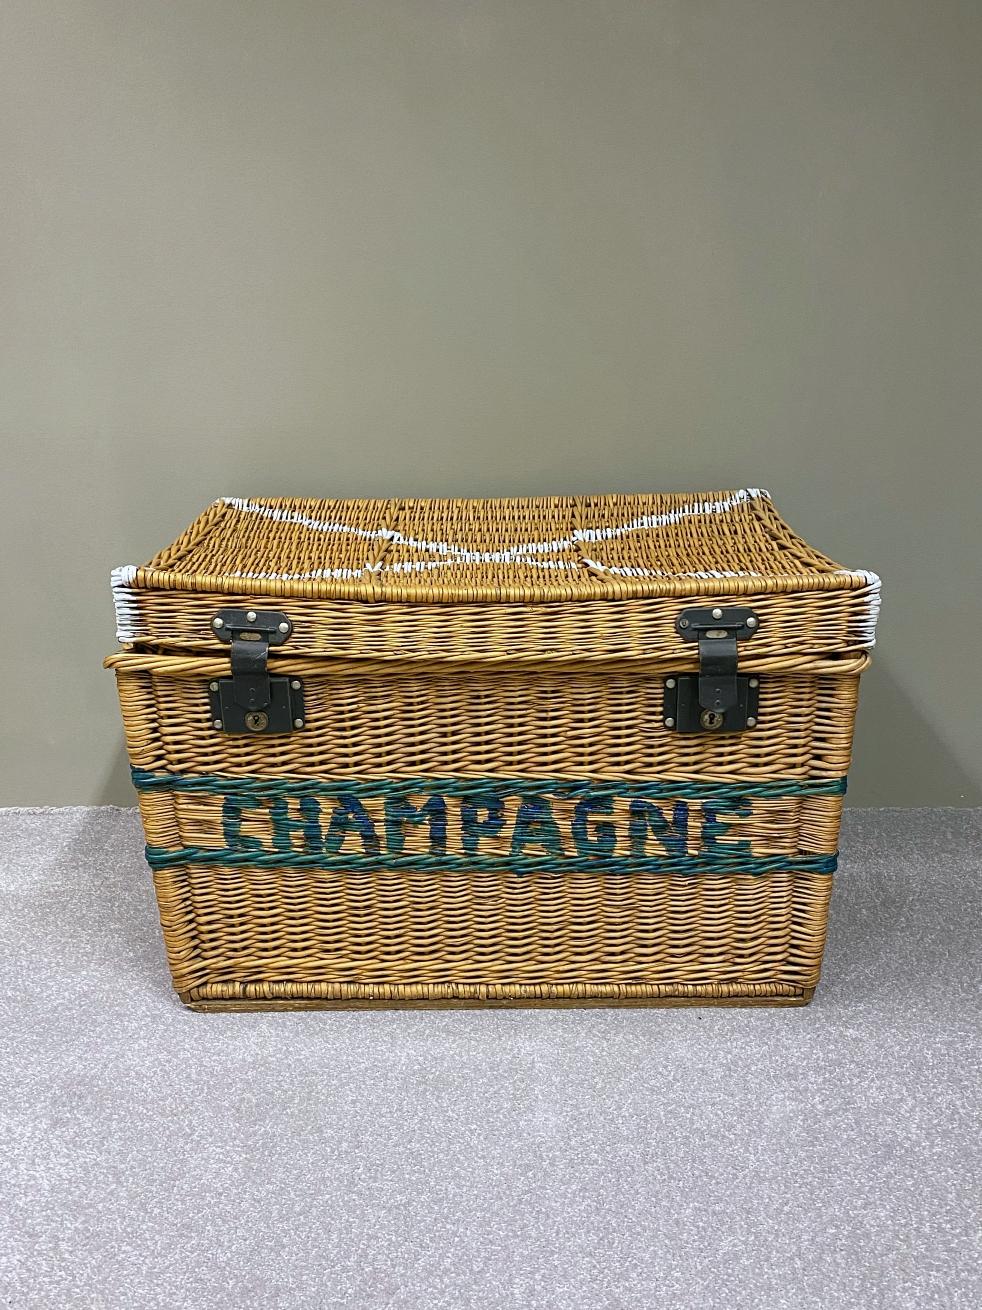 Early unique wicker trunk handmade in France in 1930s. The woven willow wicker trunk has a lid and two handles. The basket is in excellent condition with nice patina. It was used as a champagne bottle chest.
I found this beauty at an antique fair